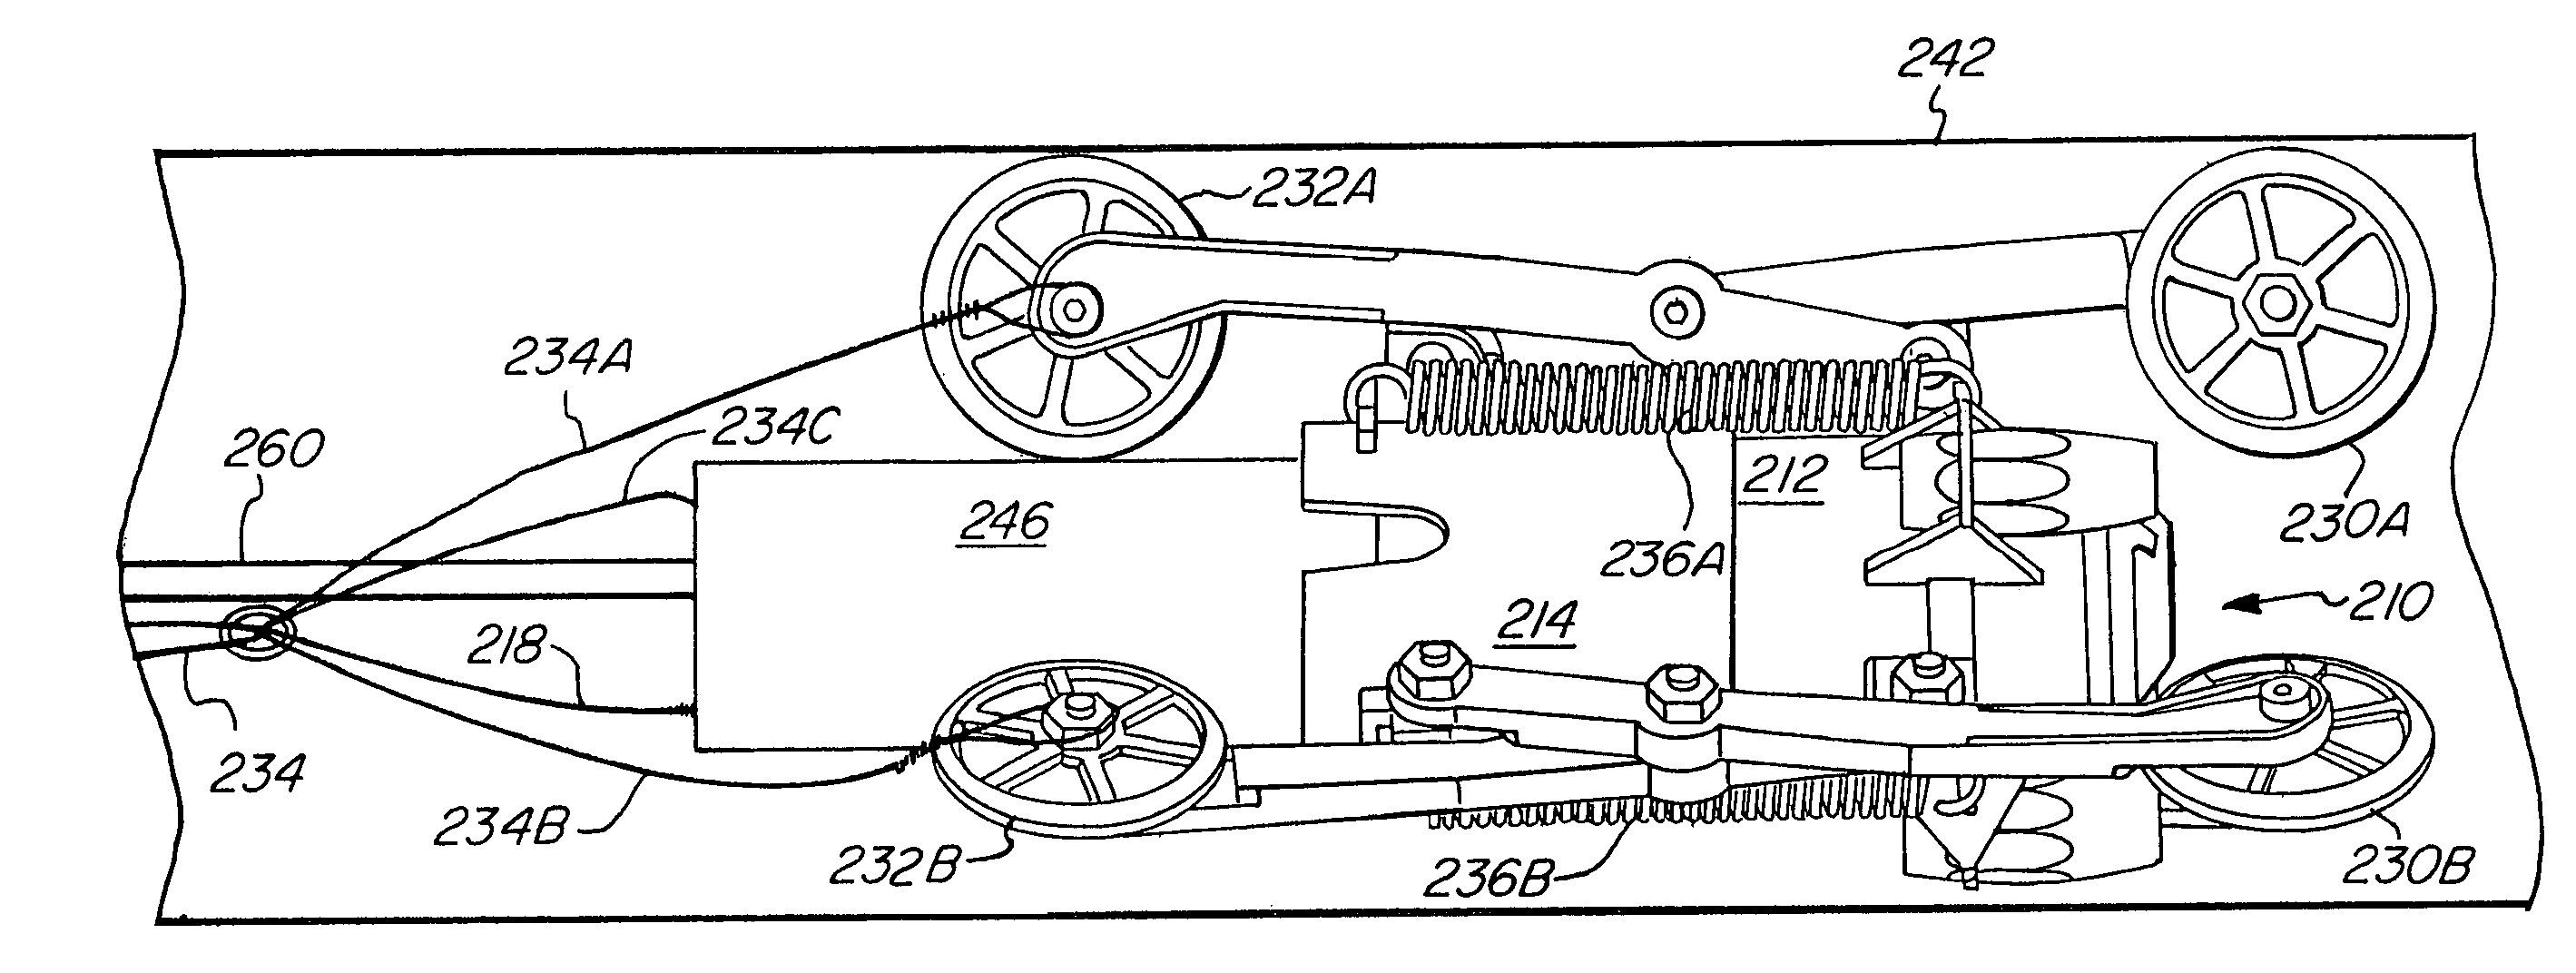 Self-adjusting and centering camera mount for inspecting pipe